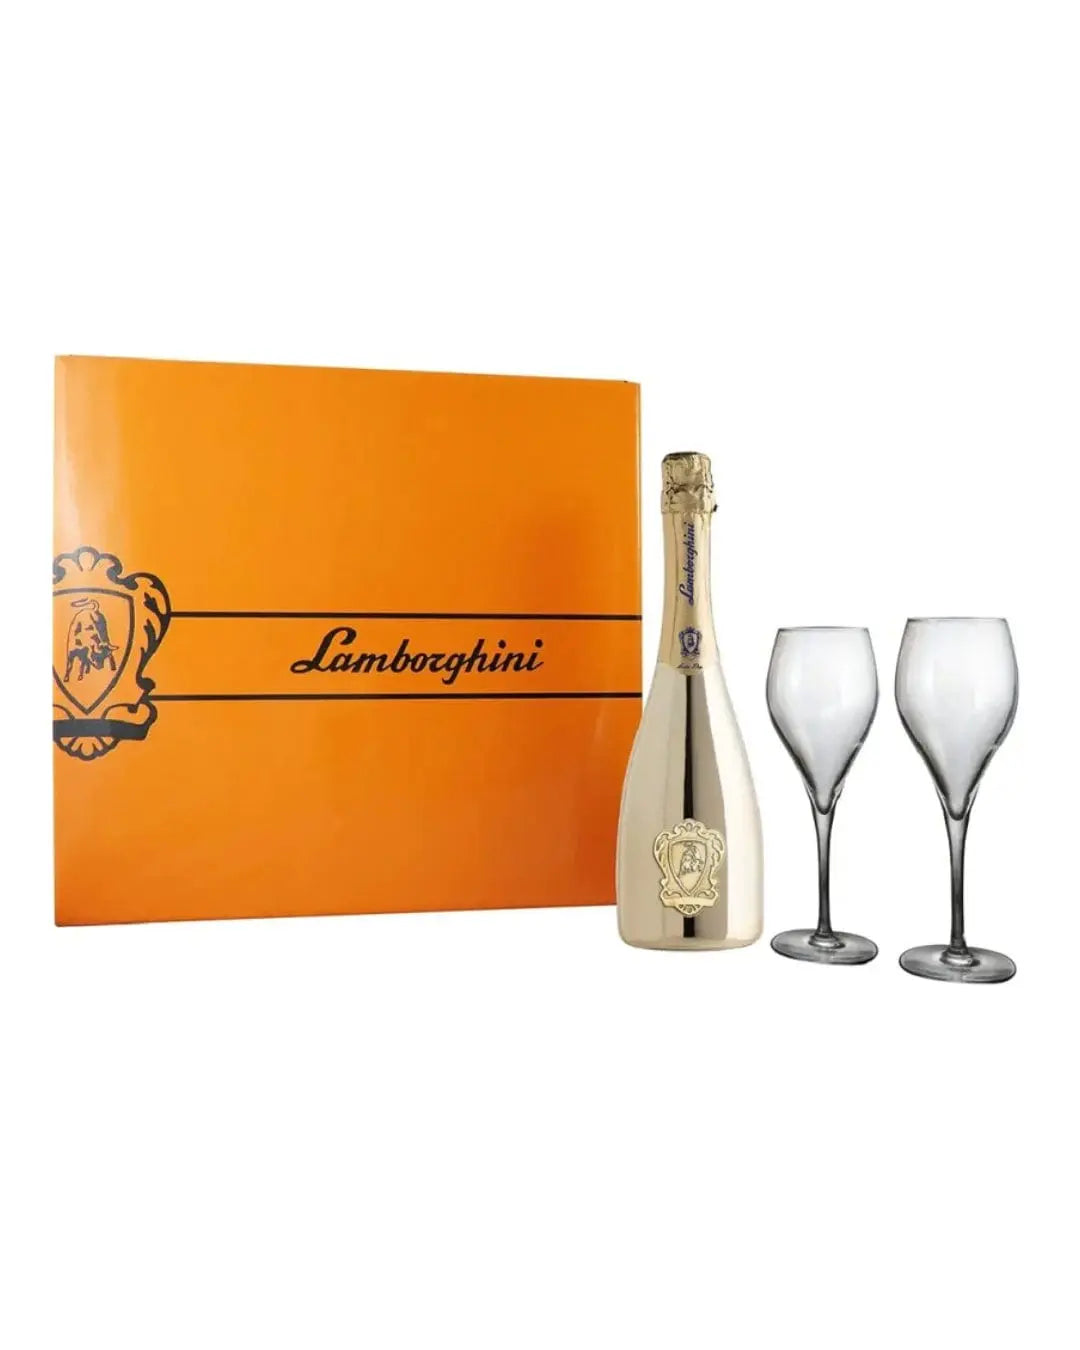 Lamborghini Extra Dry Gold Prosecco D.O.C. Gift Set With 2 Crystal Glasses, 75 cl Champagne & Sparkling